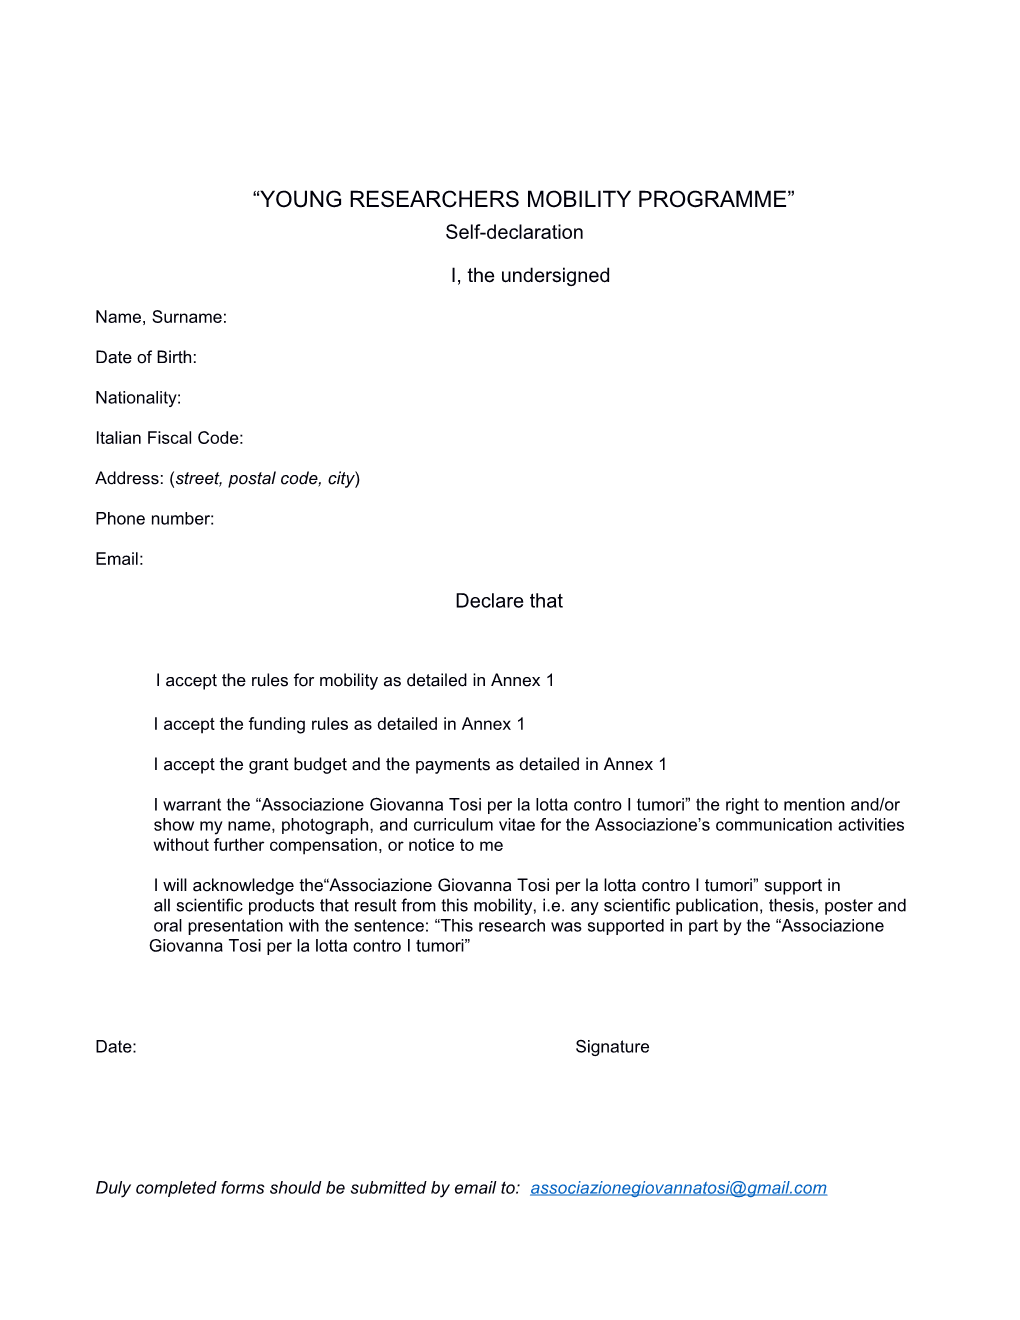 Young Researchers Mobility Programme